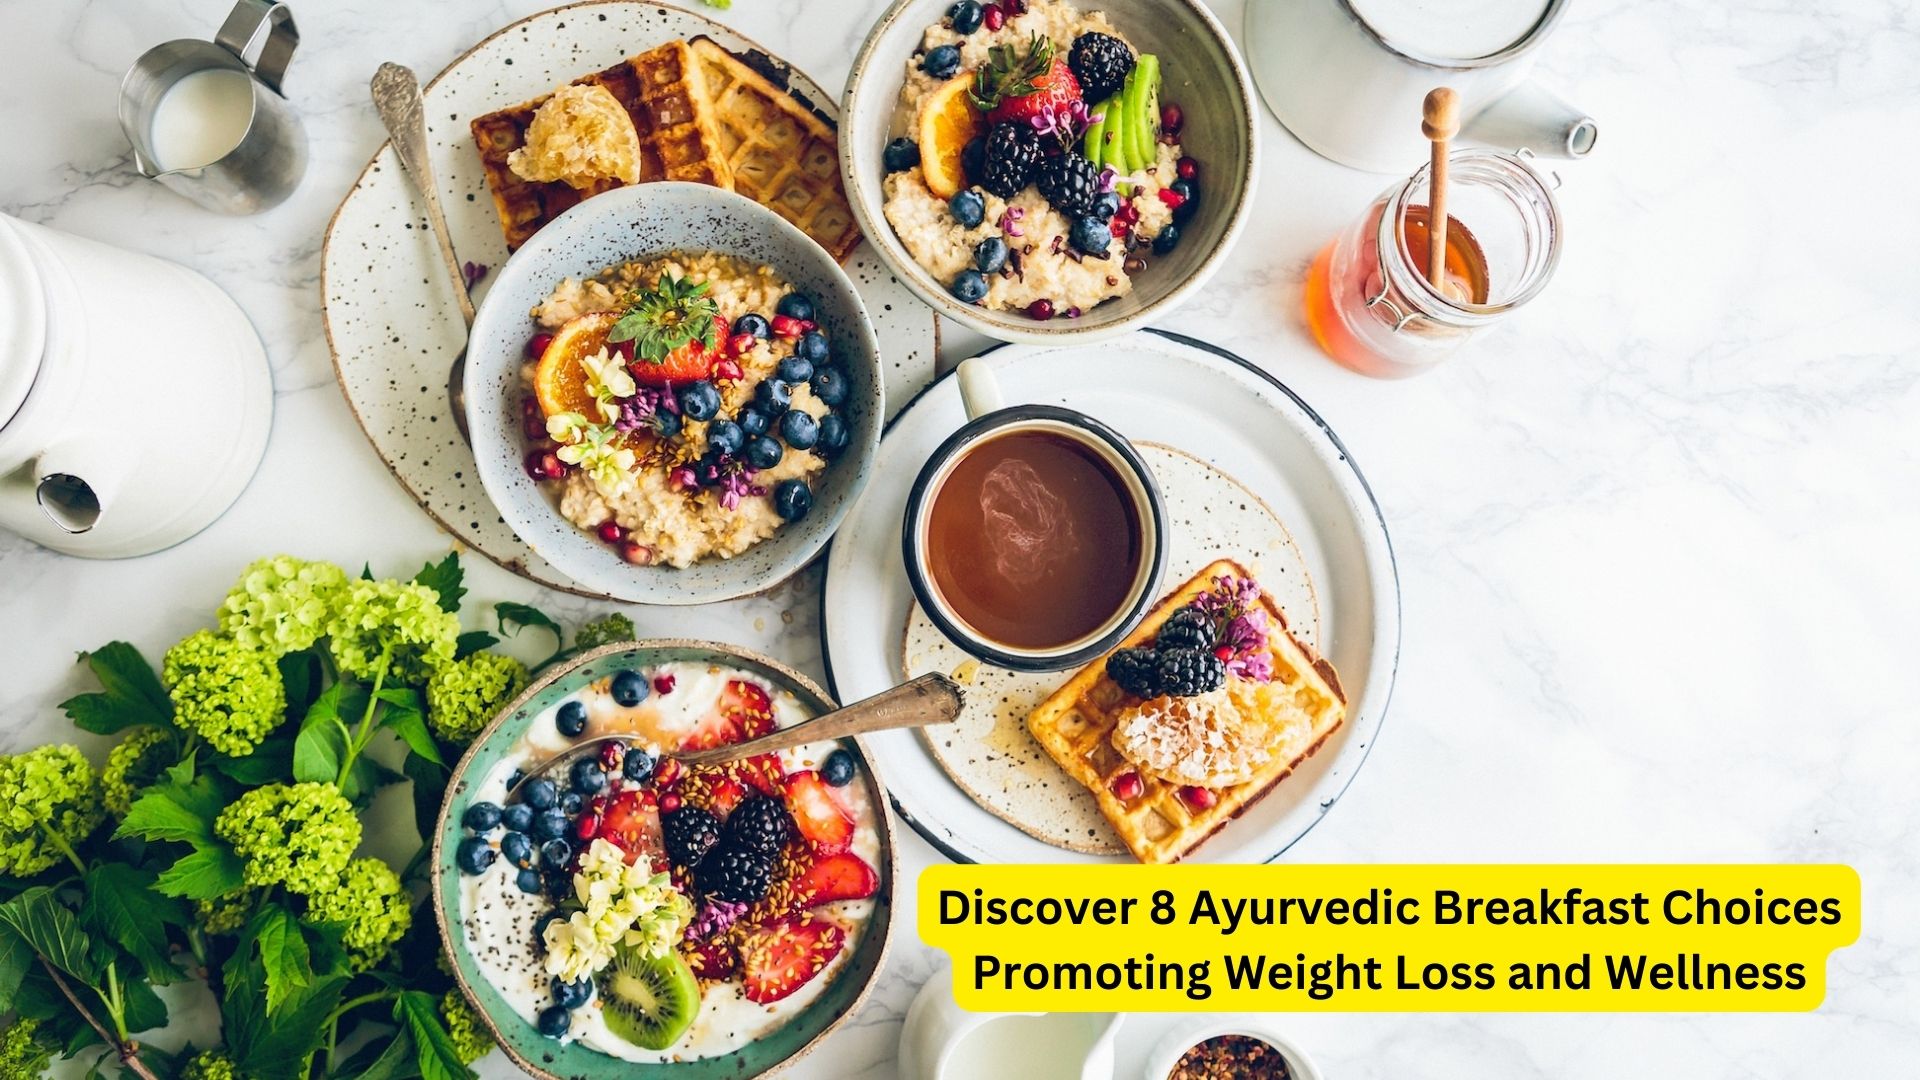 Discover 8 Ayurvedic Breakfast Choices Promoting Weight Loss and Wellness